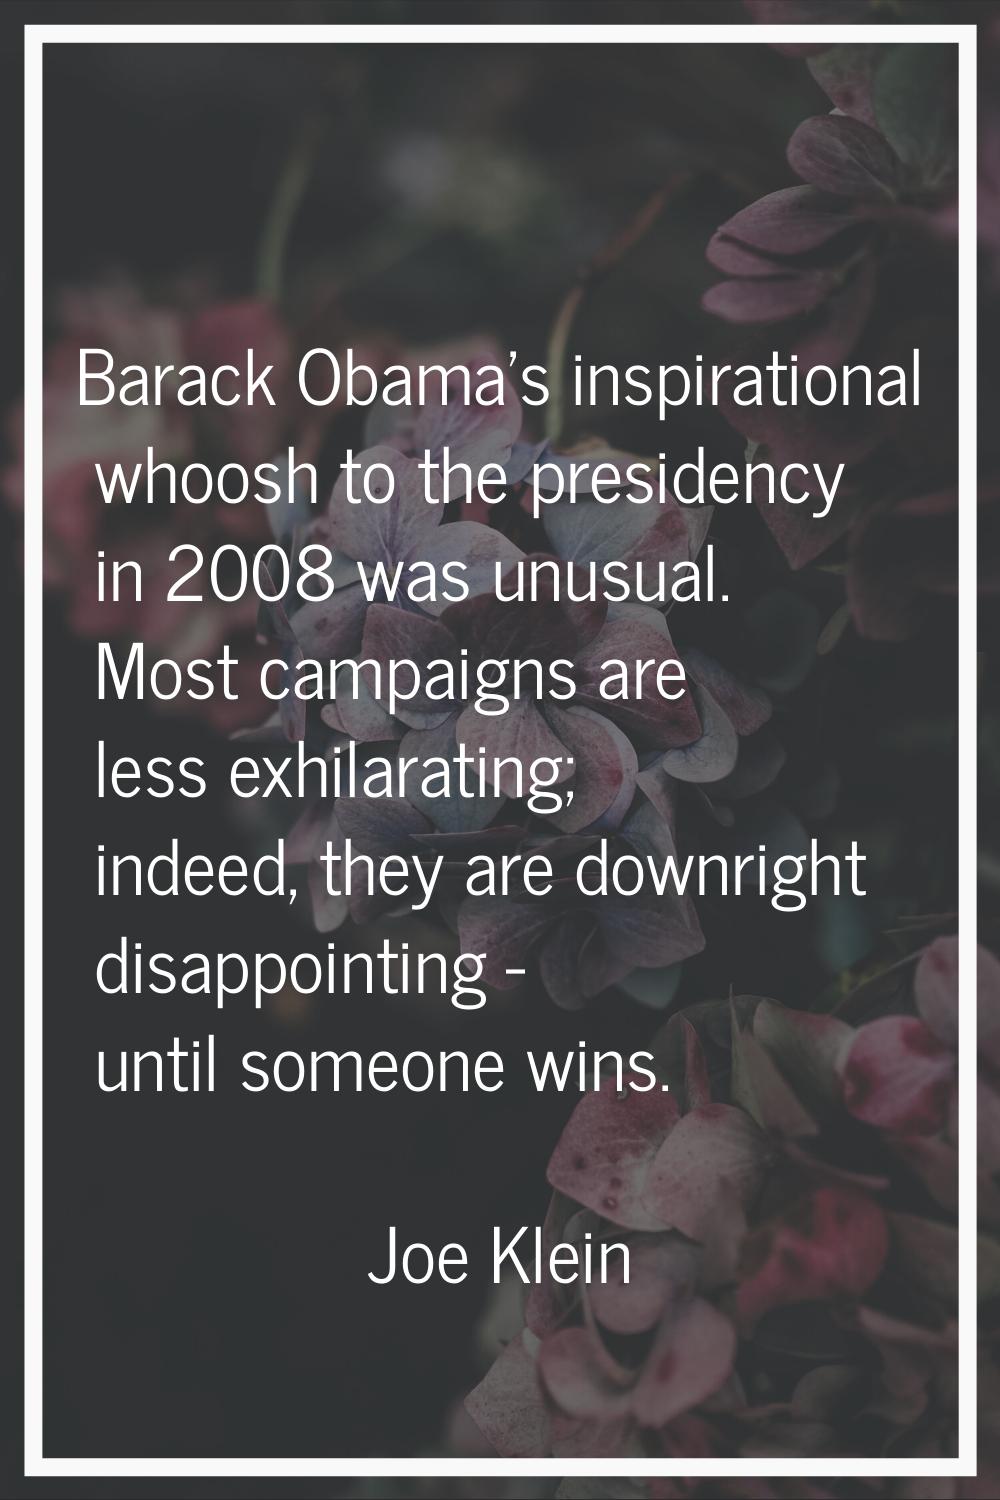 Barack Obama's inspirational whoosh to the presidency in 2008 was unusual. Most campaigns are less 